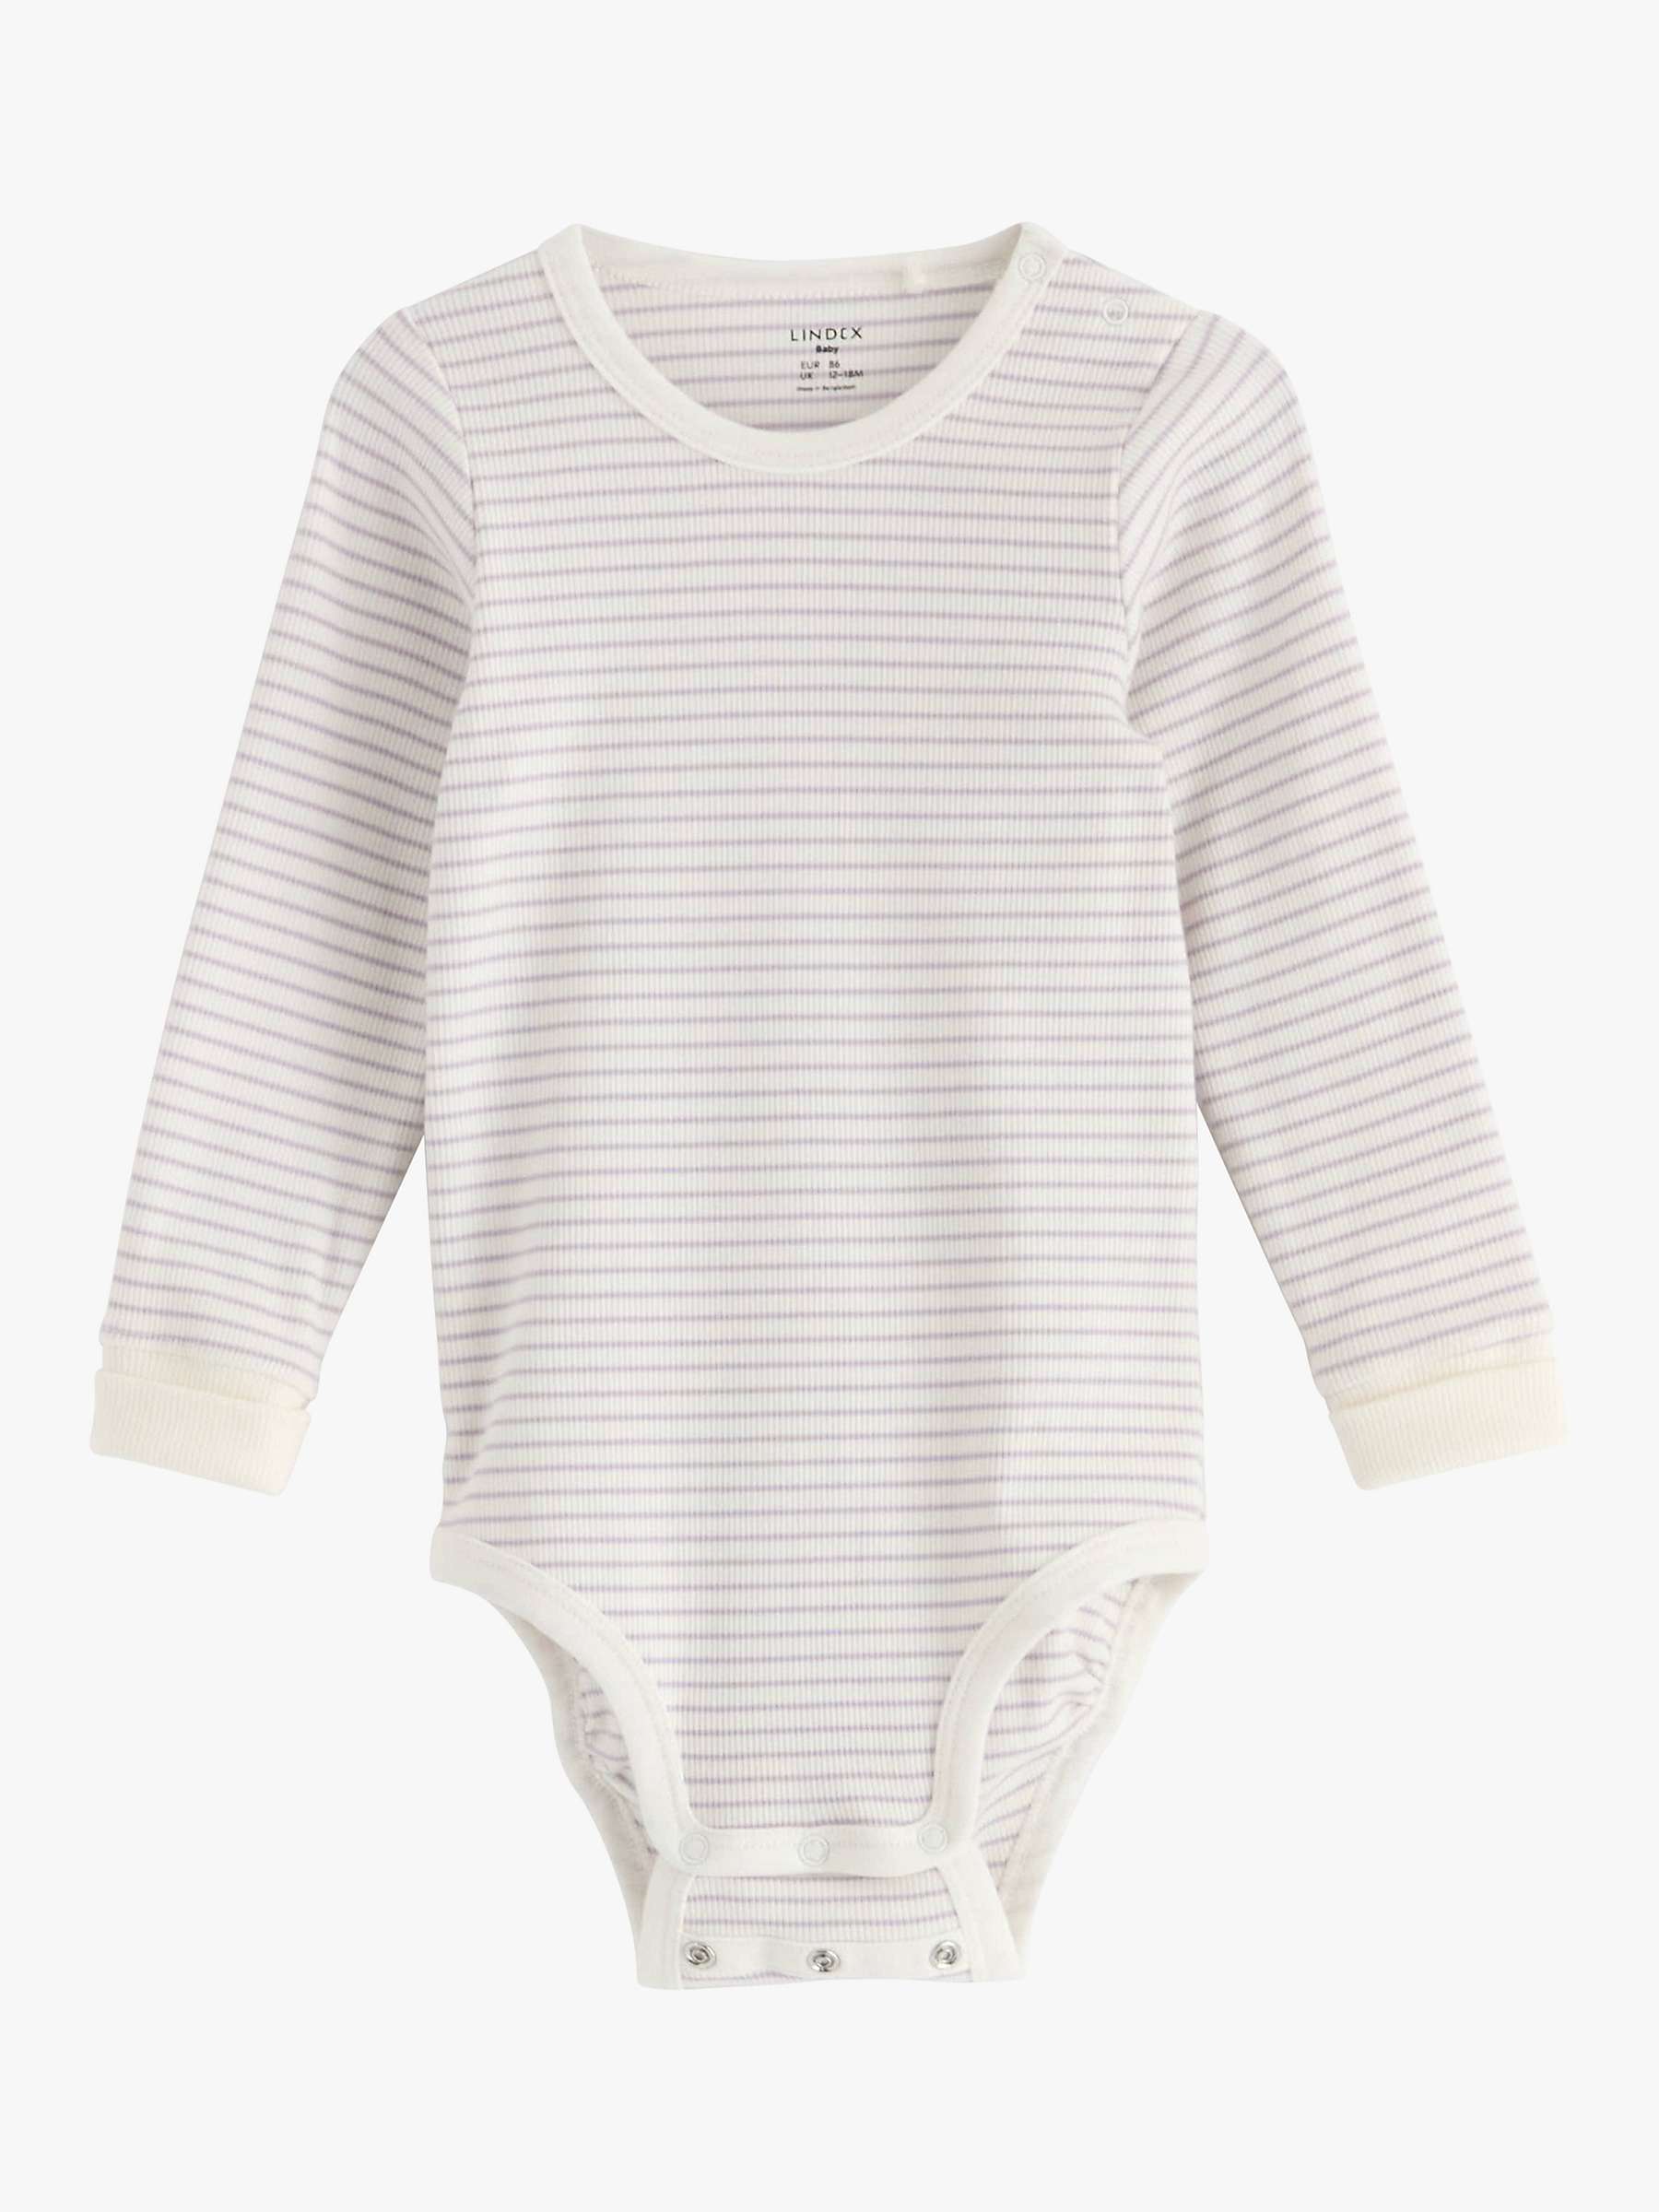 Buy Lindex Baby Organic Cotton Blend Ribbed Stripe Bodysuit, Light Dusty Lilac Online at johnlewis.com